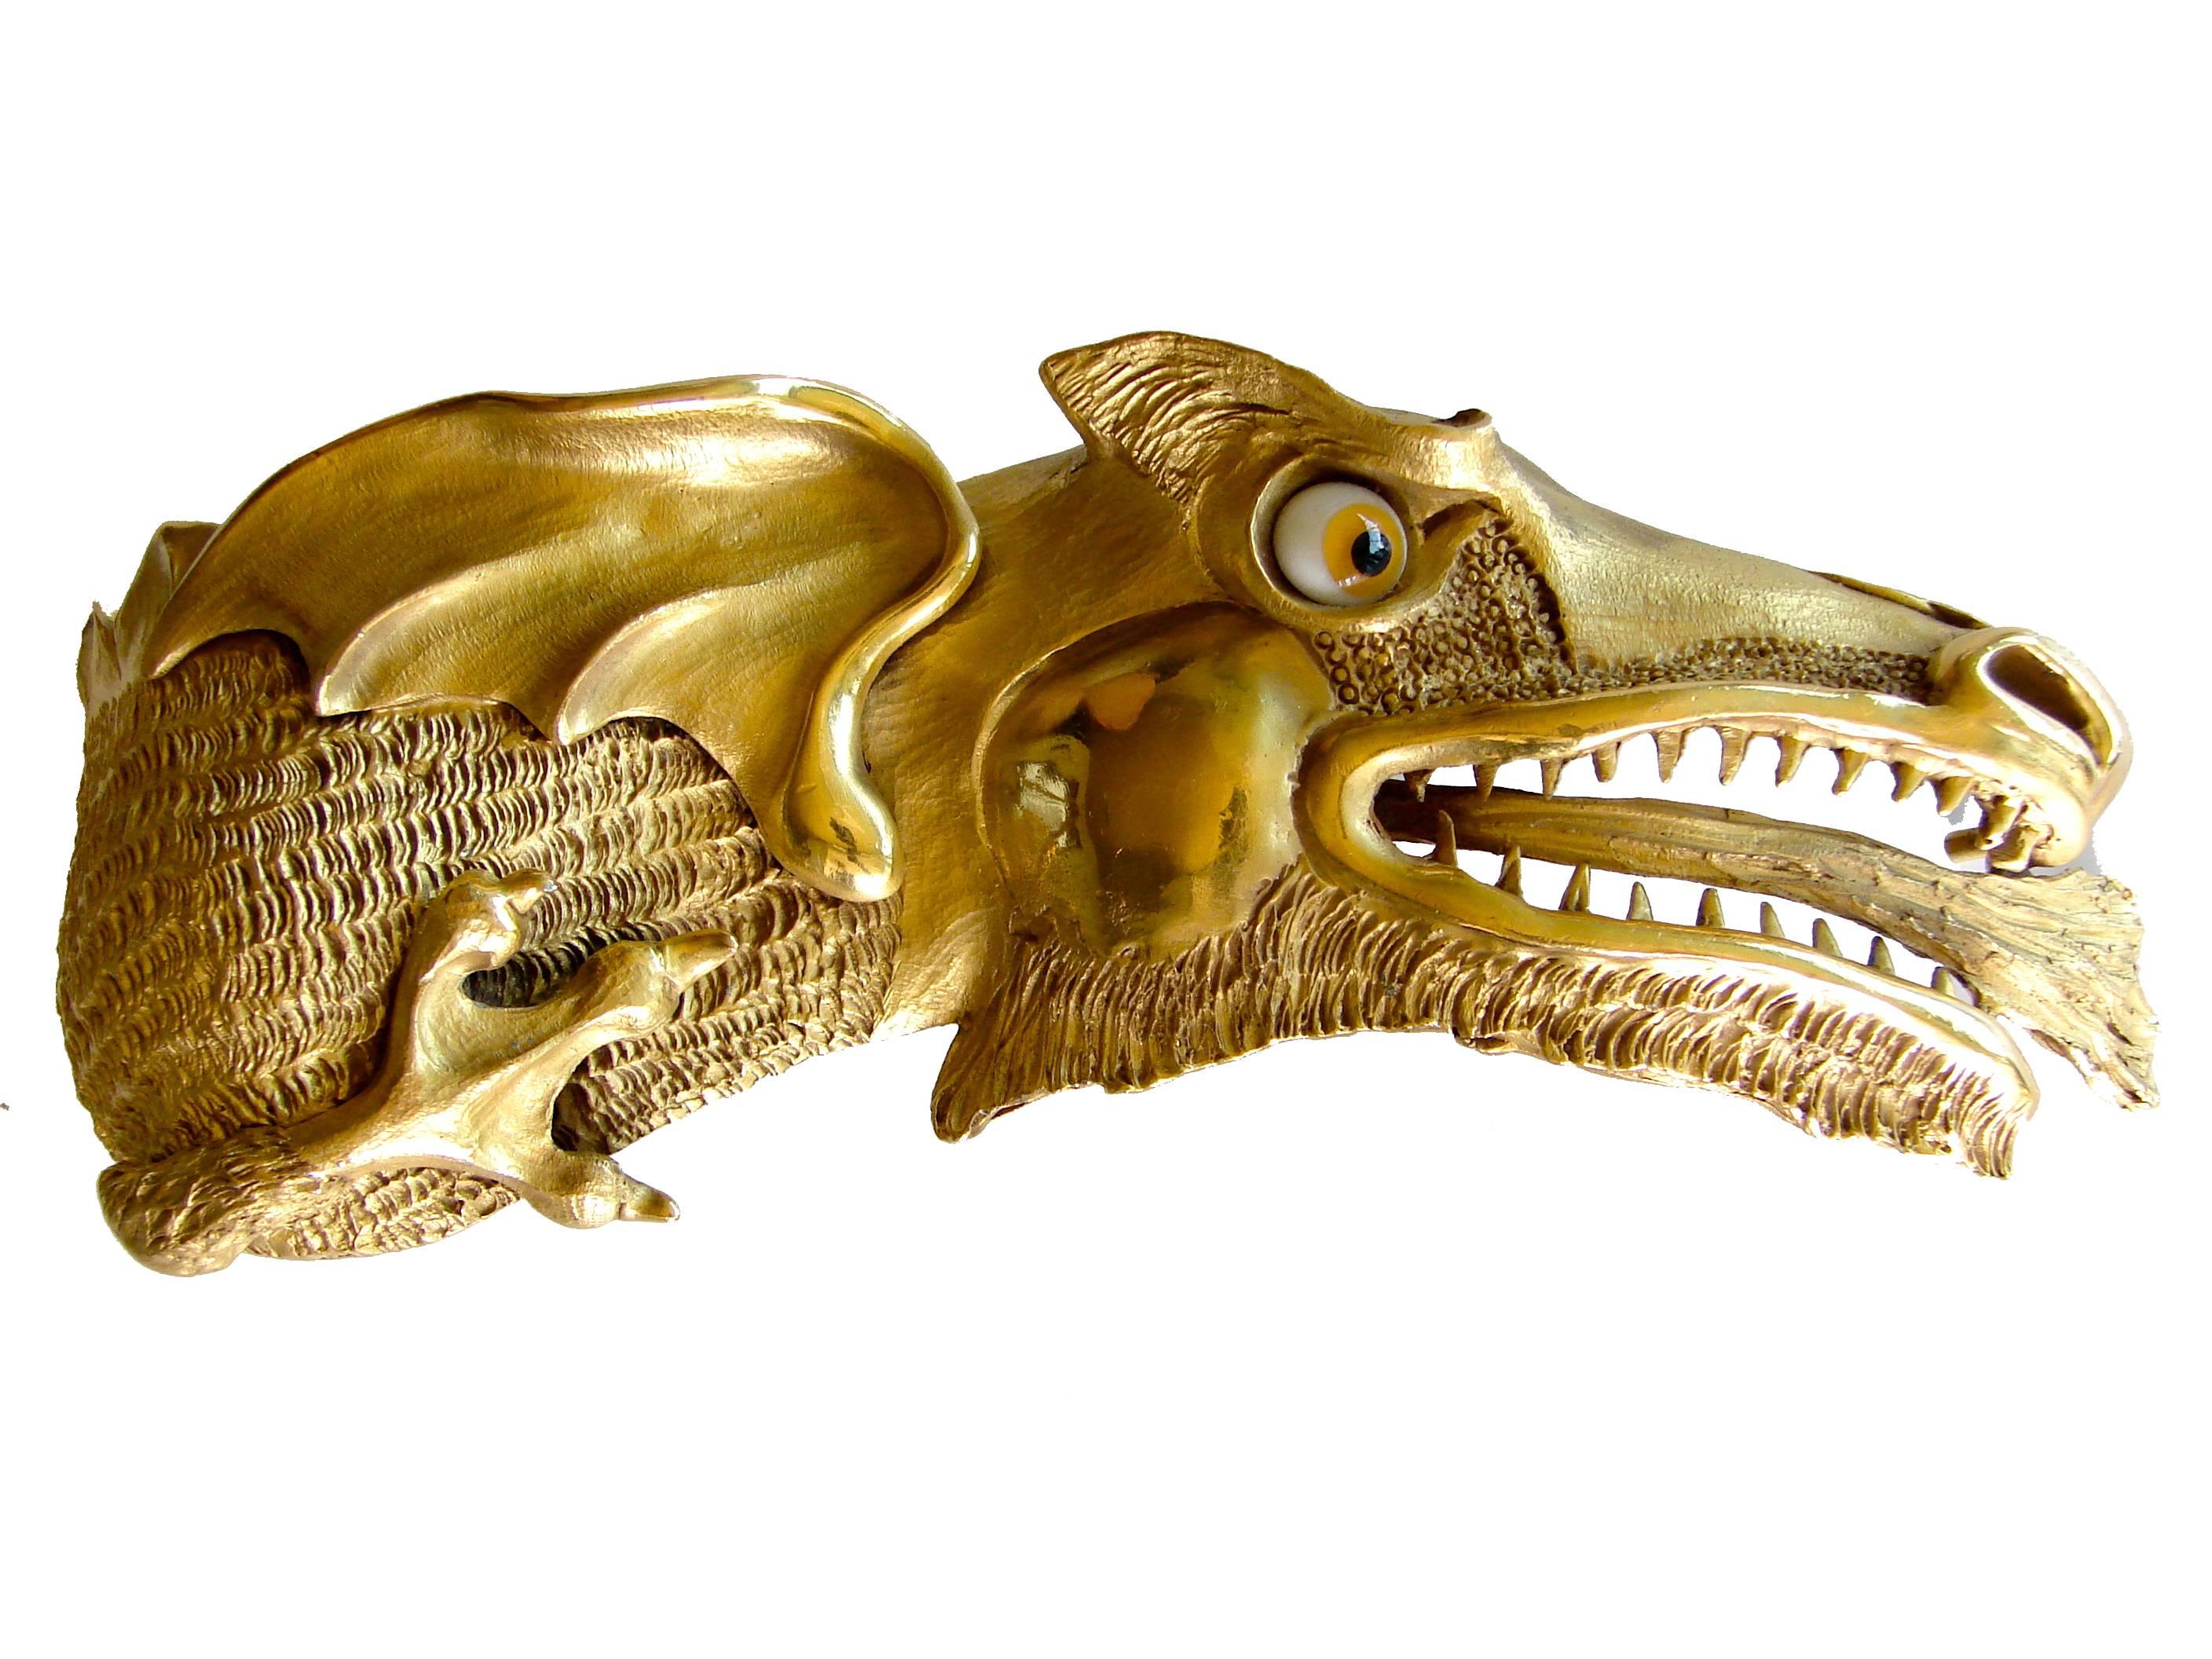 This unique belt buckle was created by sculptor Christopher Ross in the 1980s.  Made from 24k gold plated metal, it measures 7